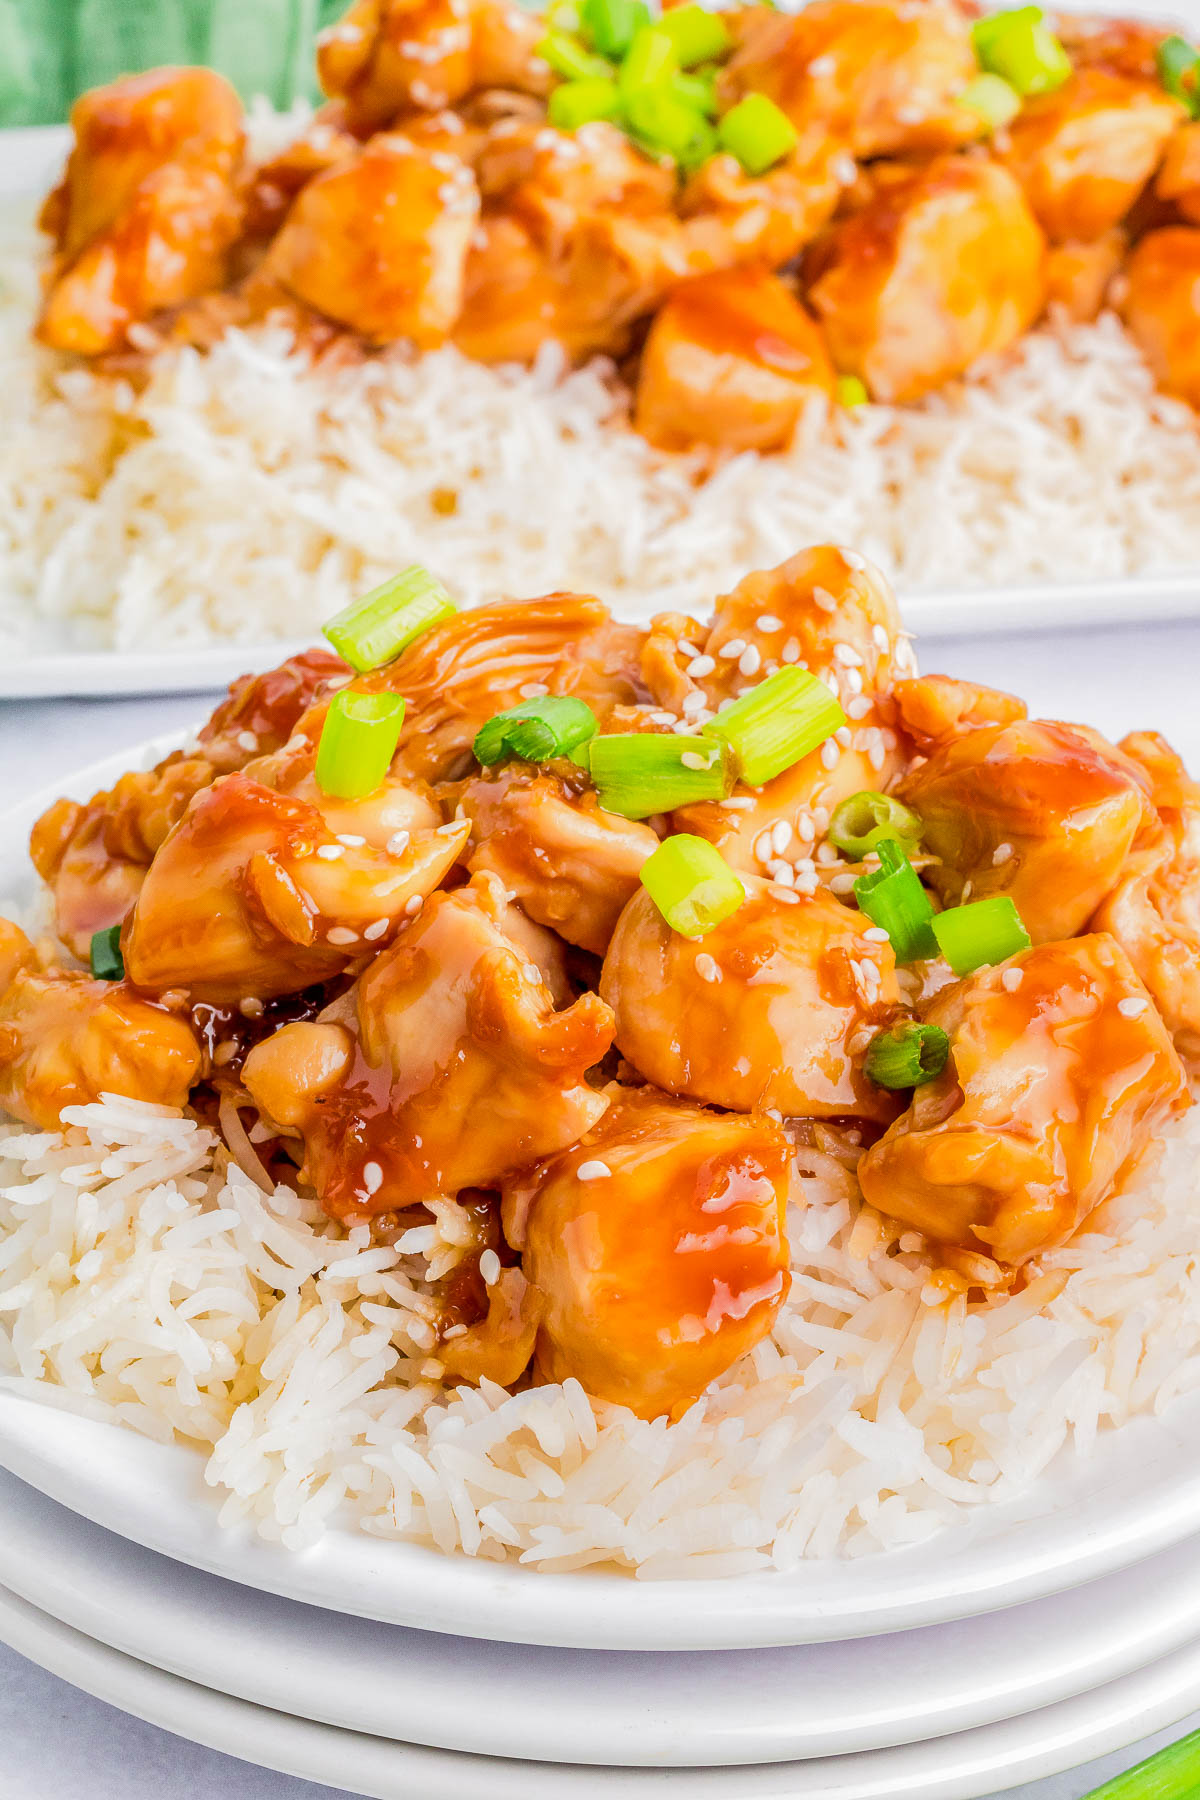 A plate of white rice topped with pieces of orange-glazed chicken, green onions, and sesame seeds.